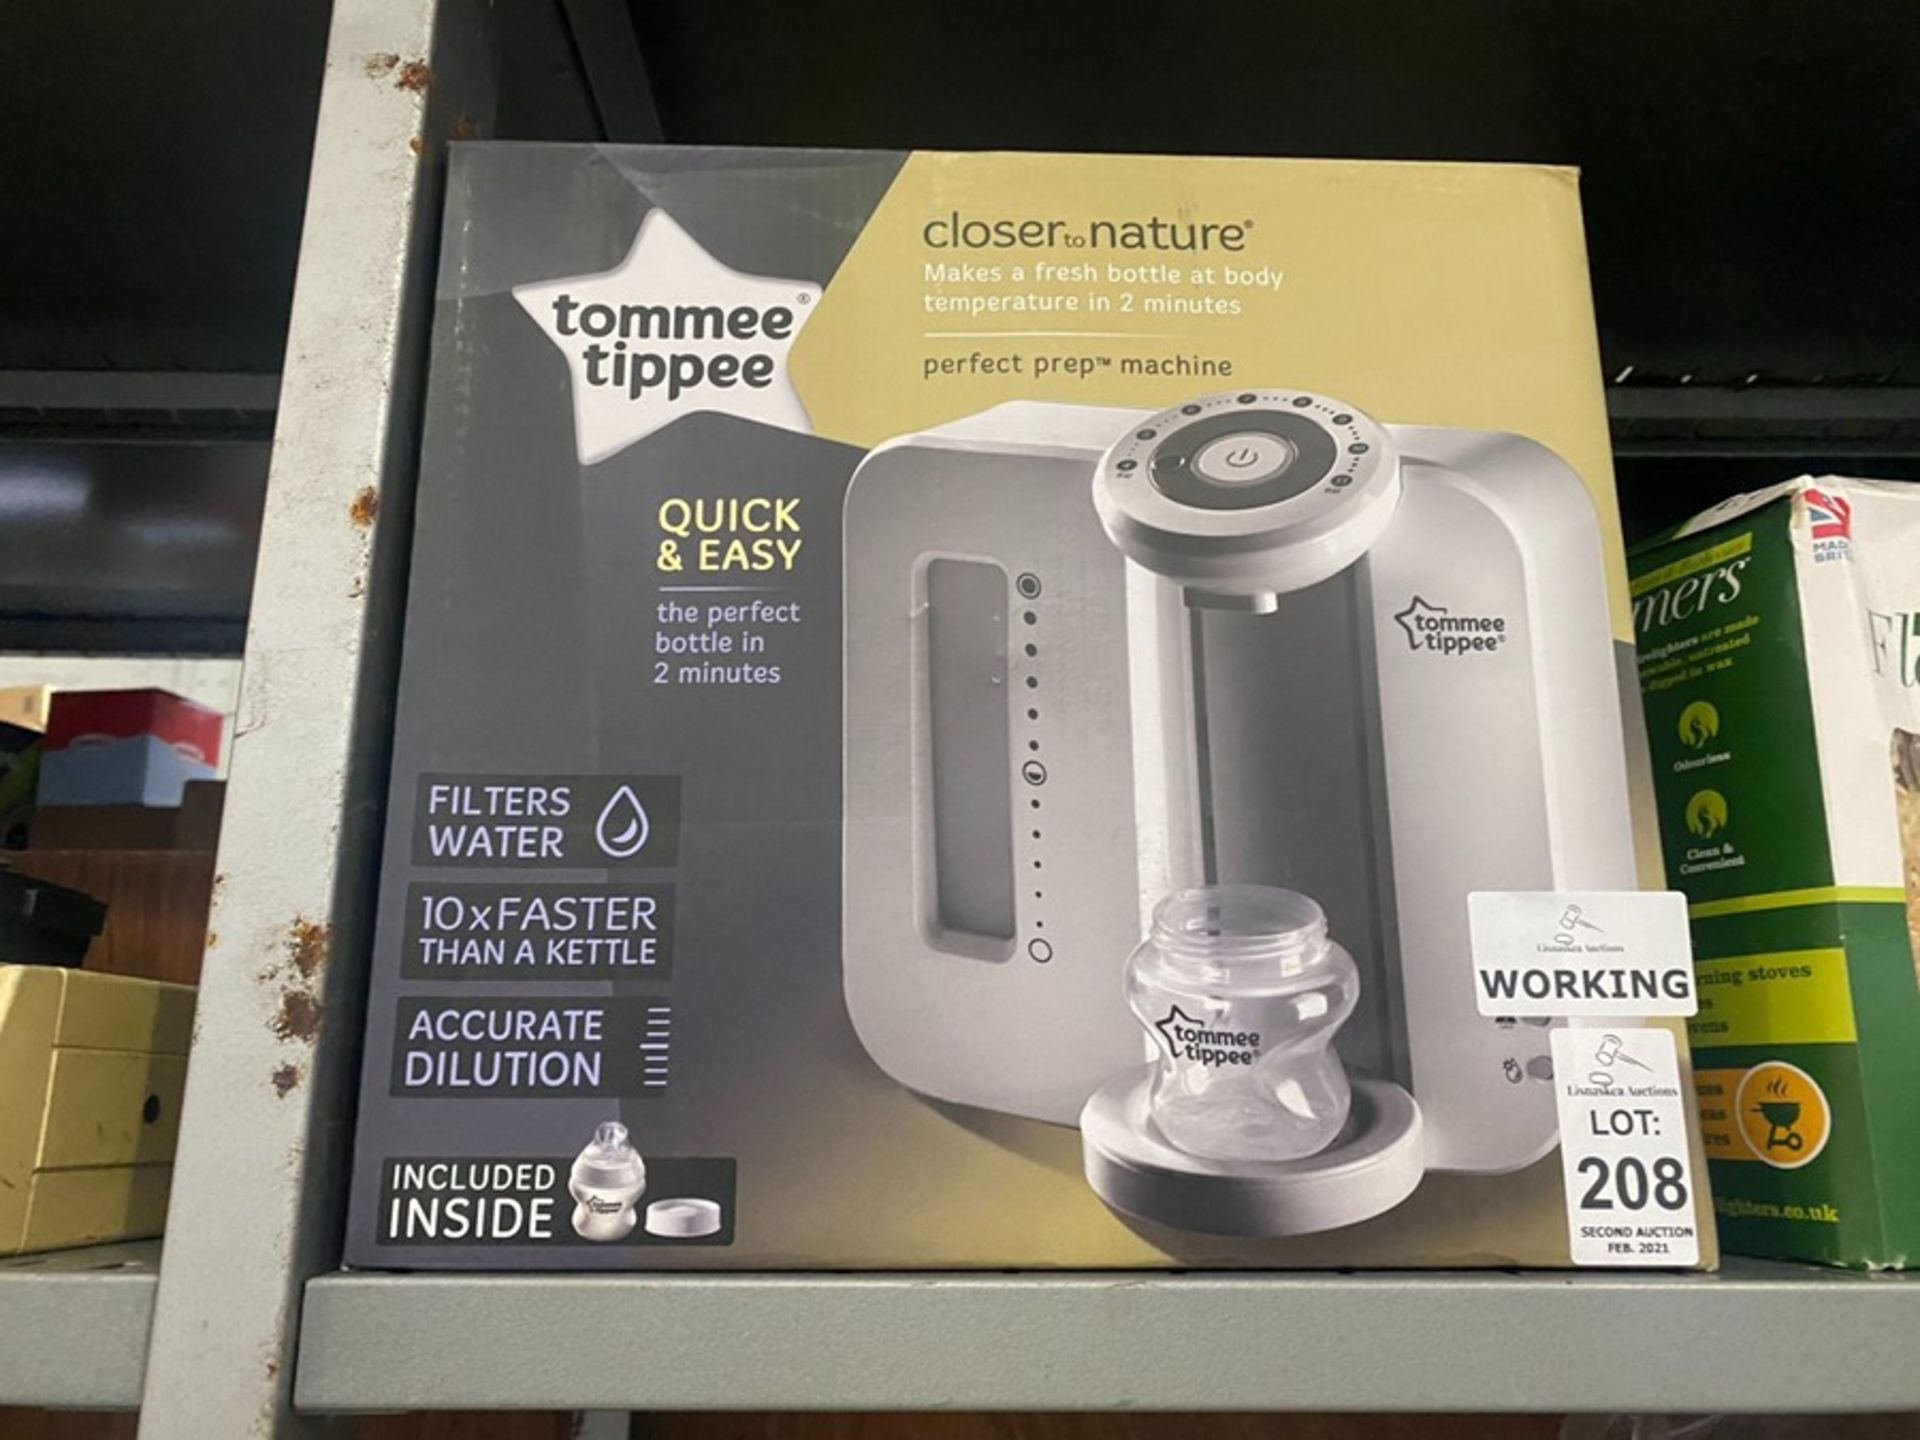 TOMMEE TIPPEE CLOSER TO NATURE BOTTLE MAKER